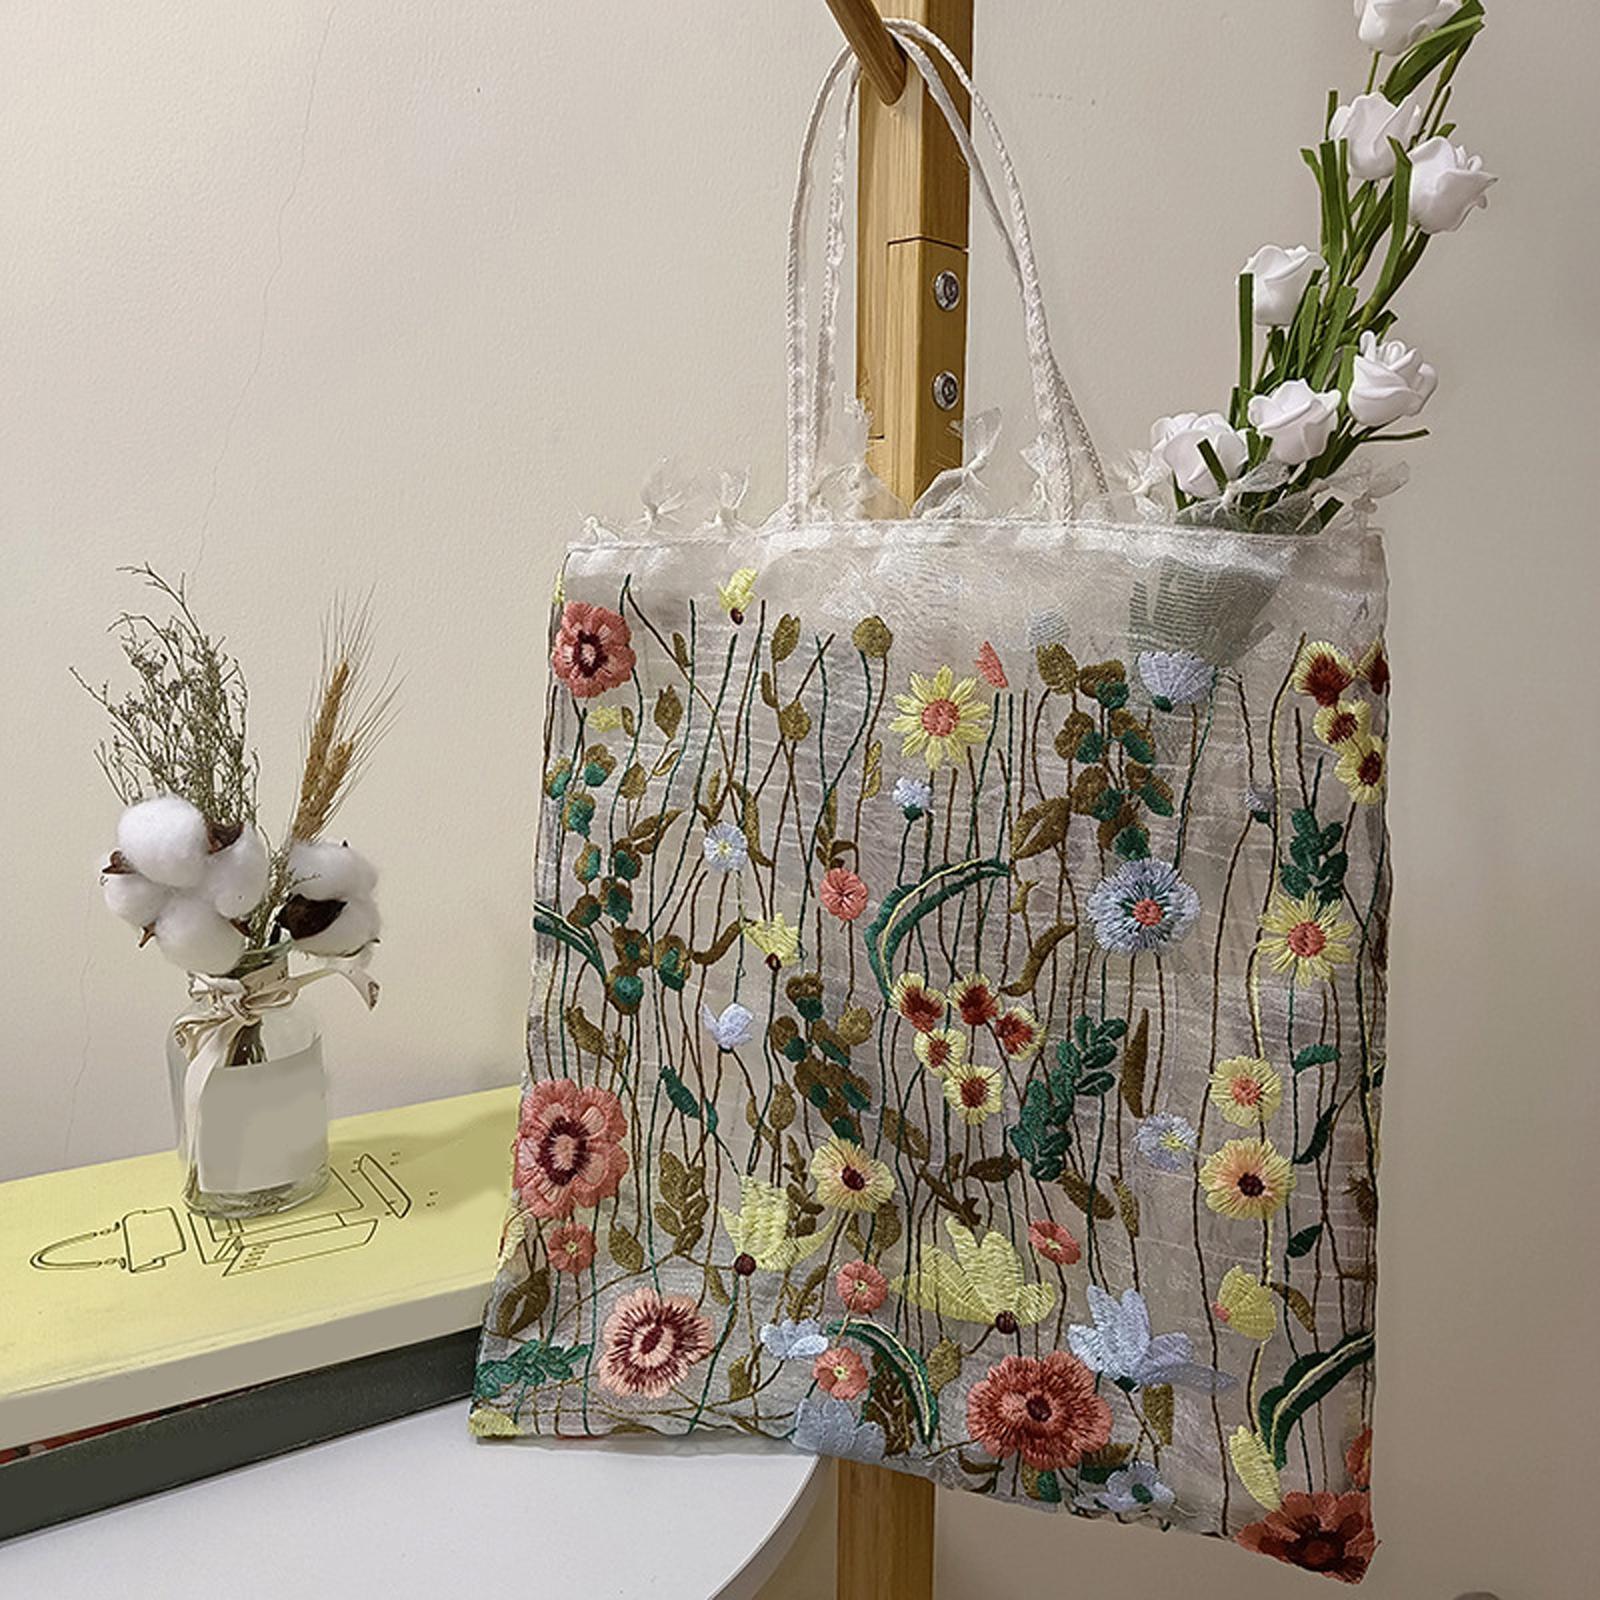 Fashion Embroidered Tote Bag for Shopping Working Traveling